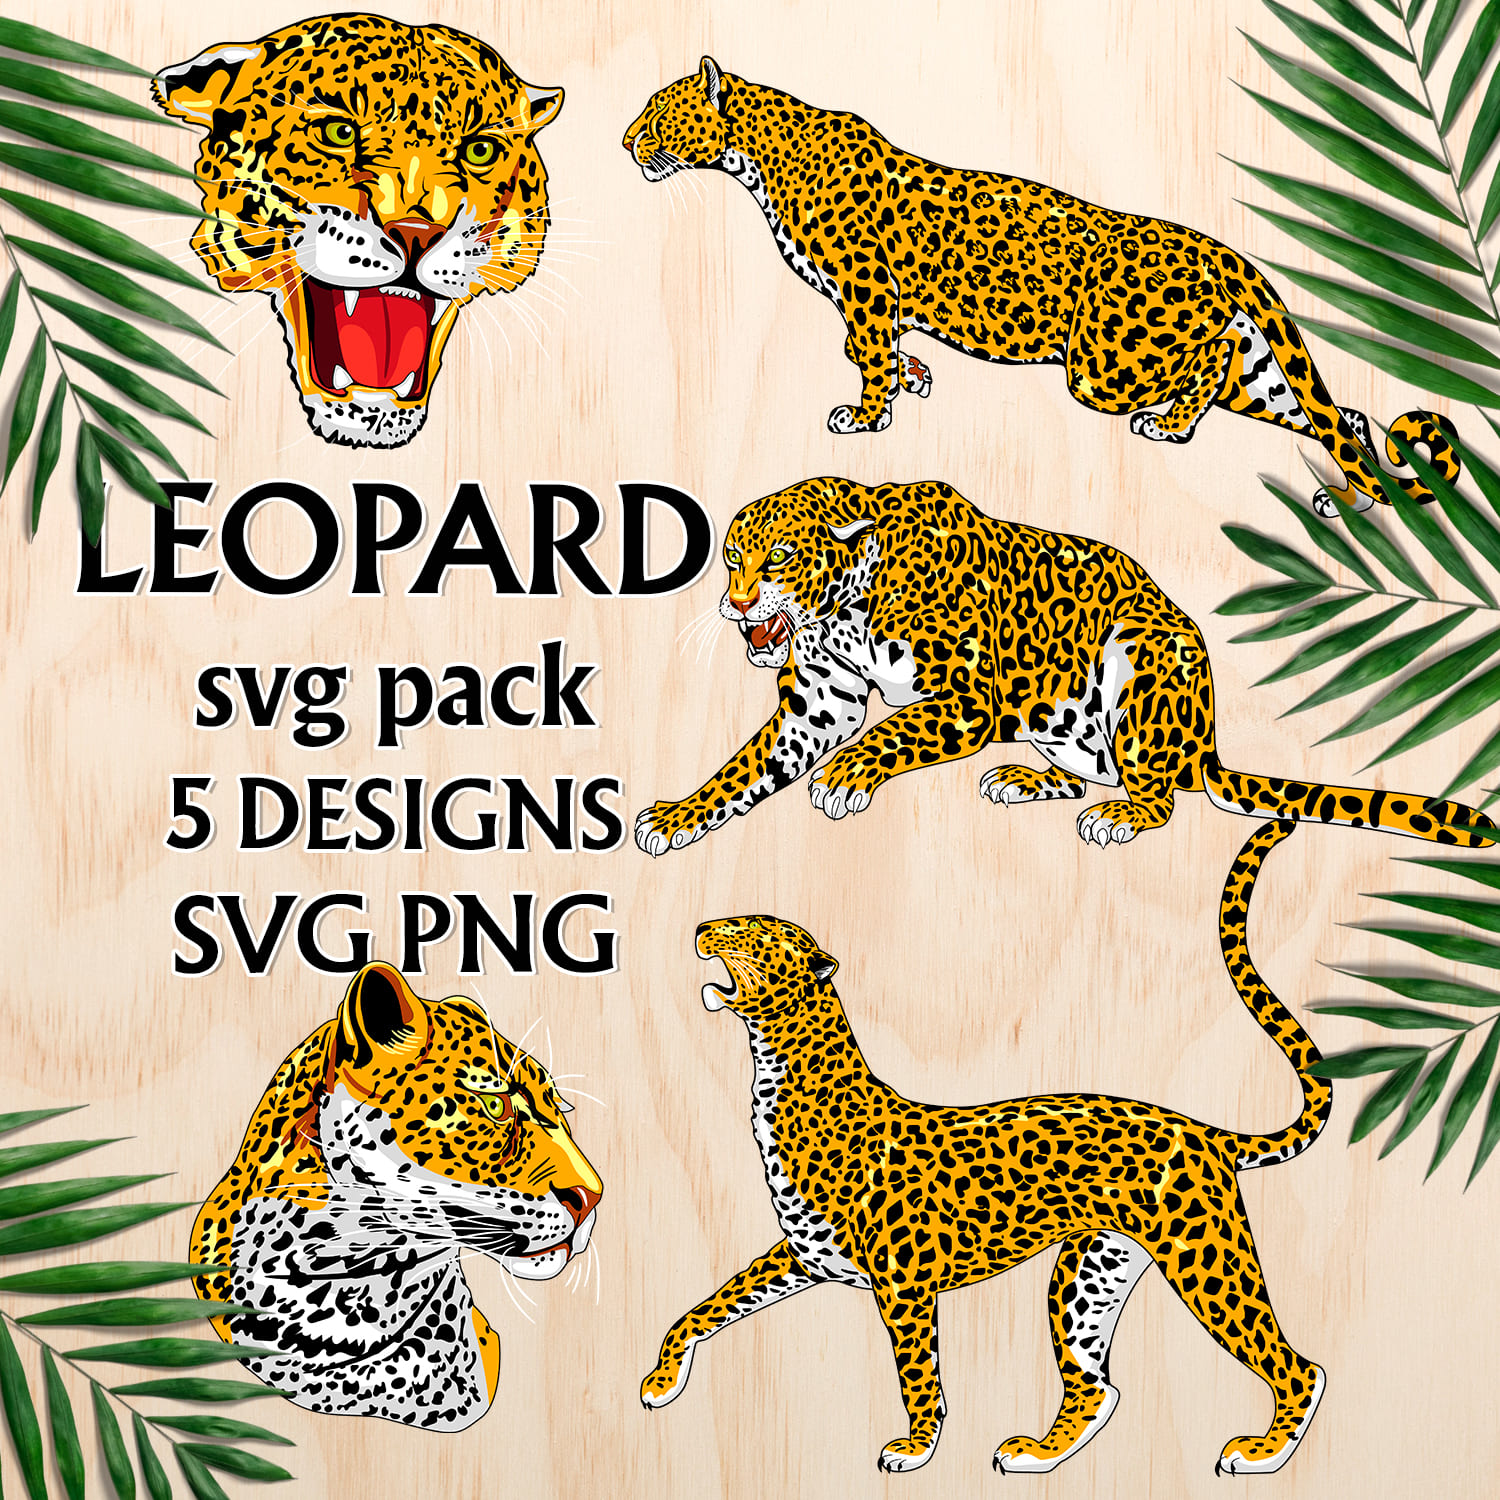 Picture of leopards and leopards on a wooden background.